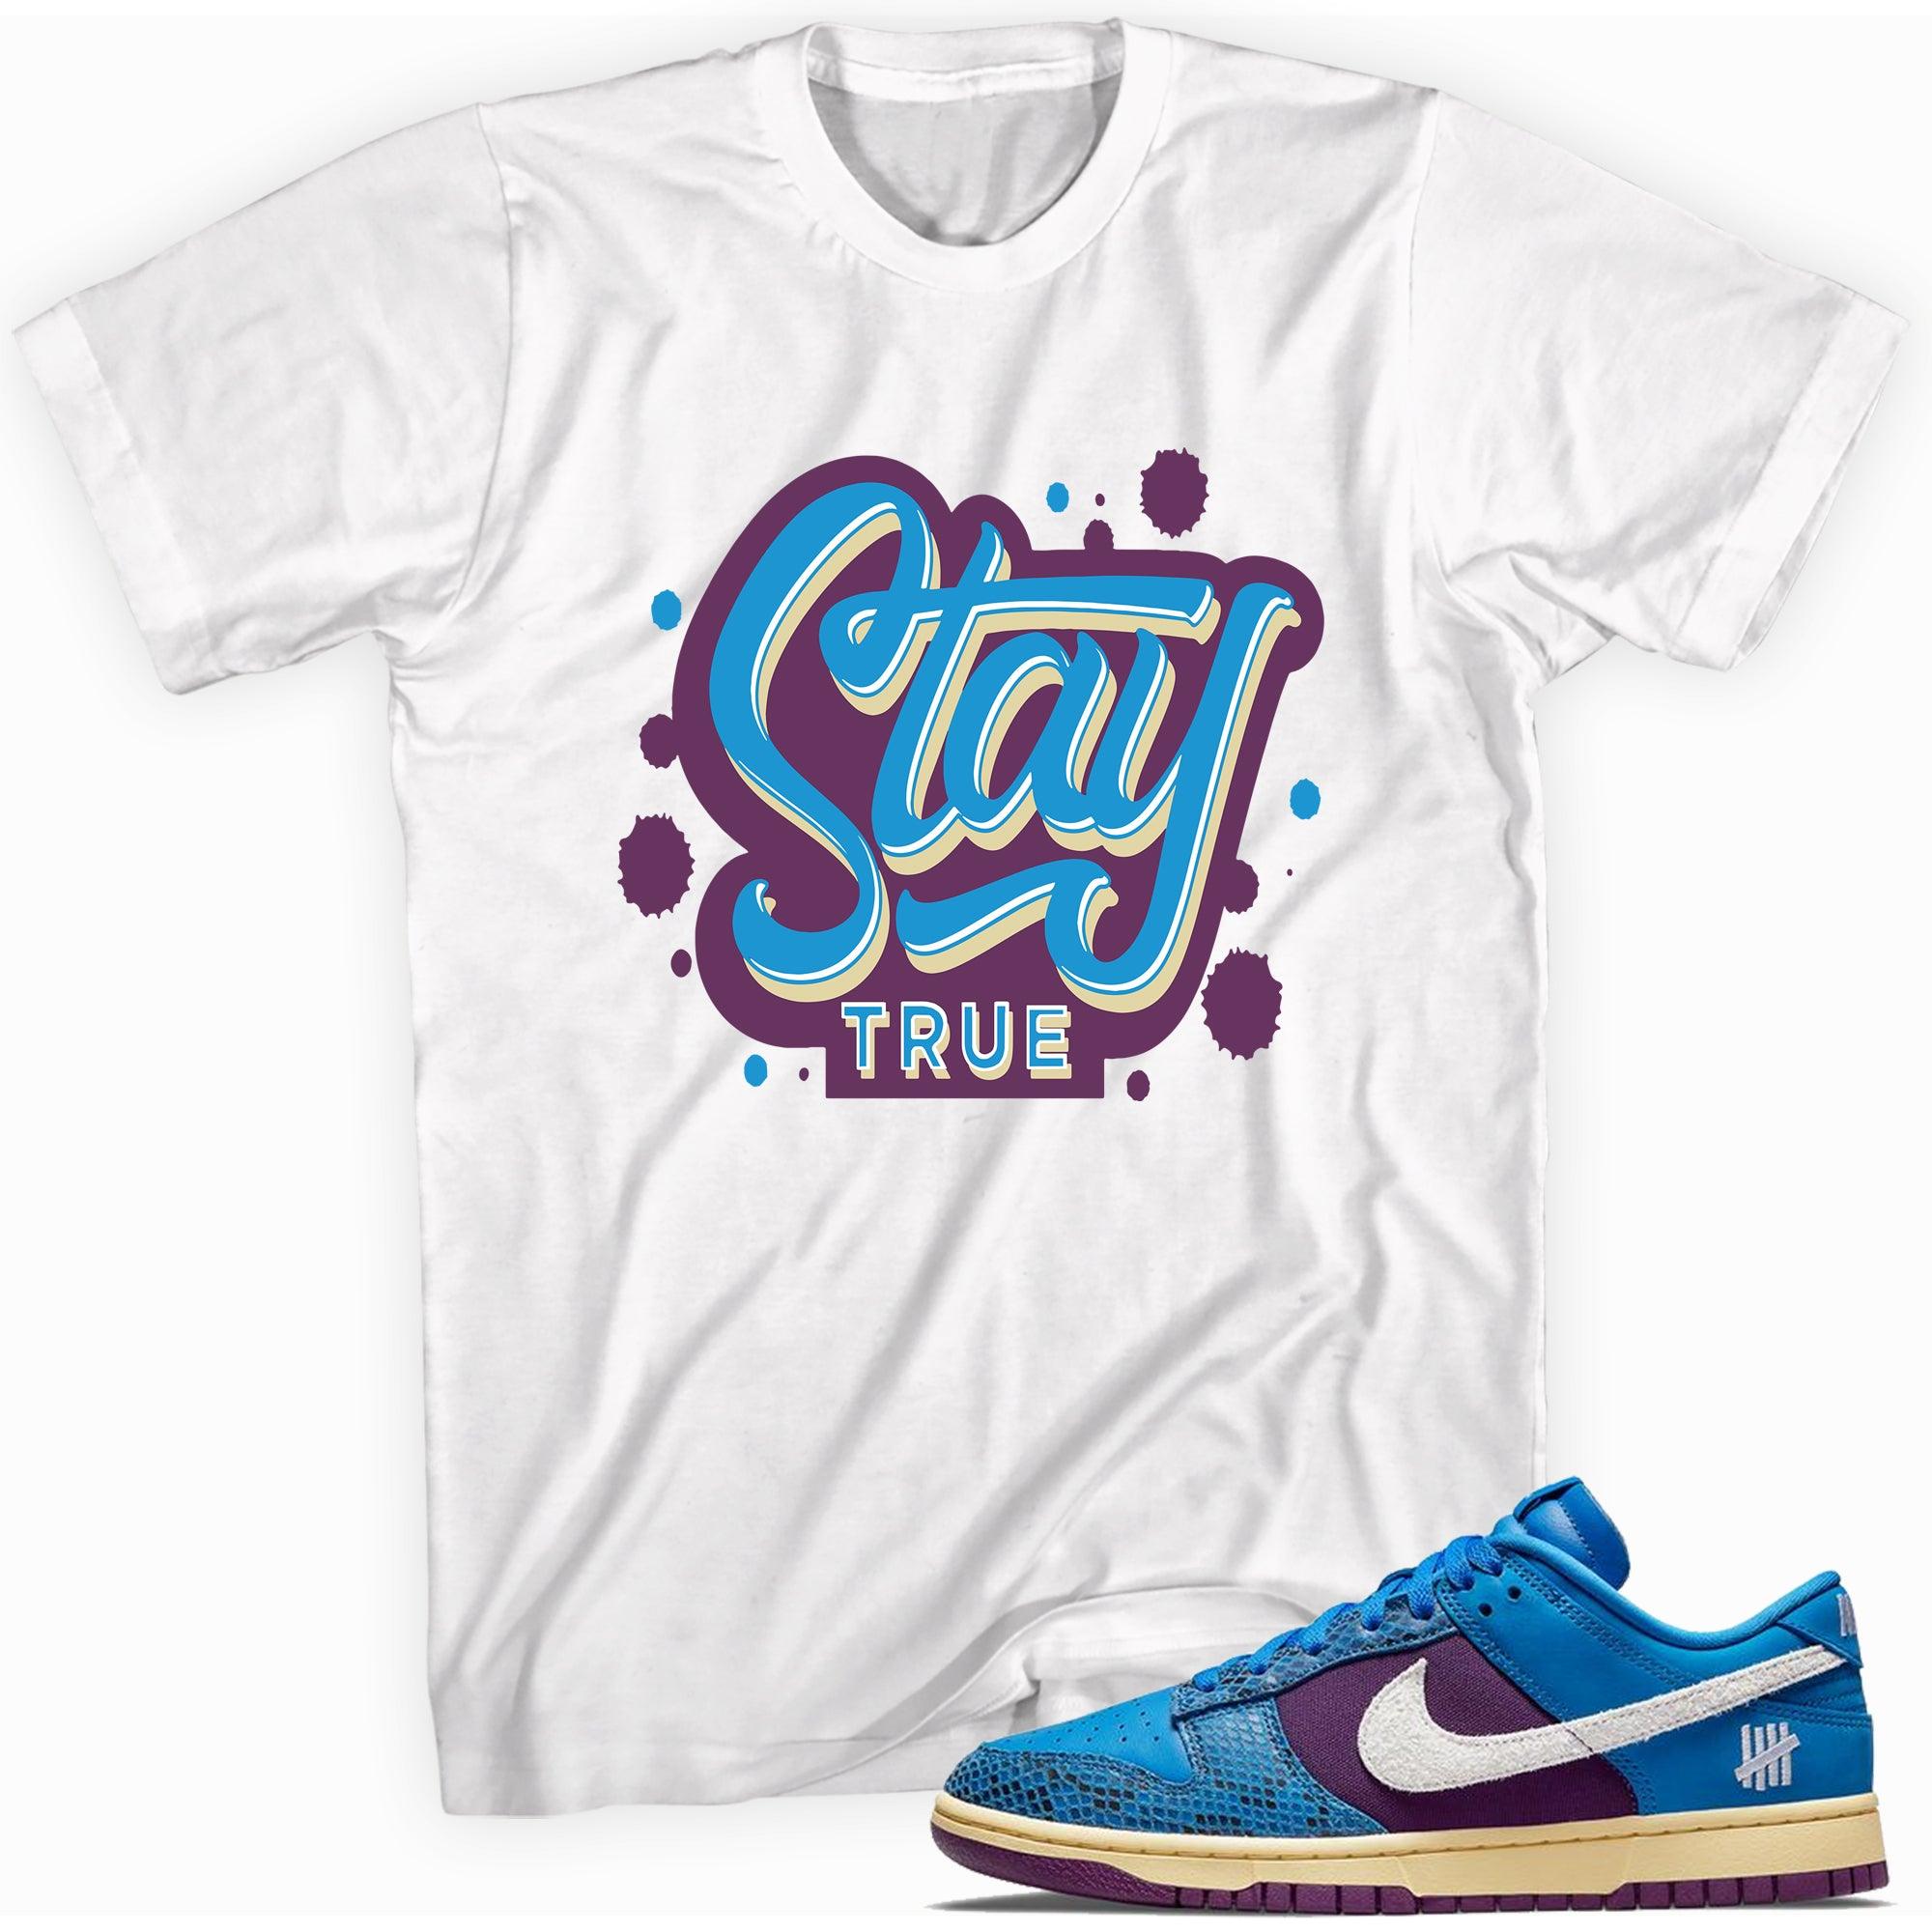 Stay True Shirt Nike Dunk Low Undefeated 5 On It Dunk vs AF1 Sneakers photo